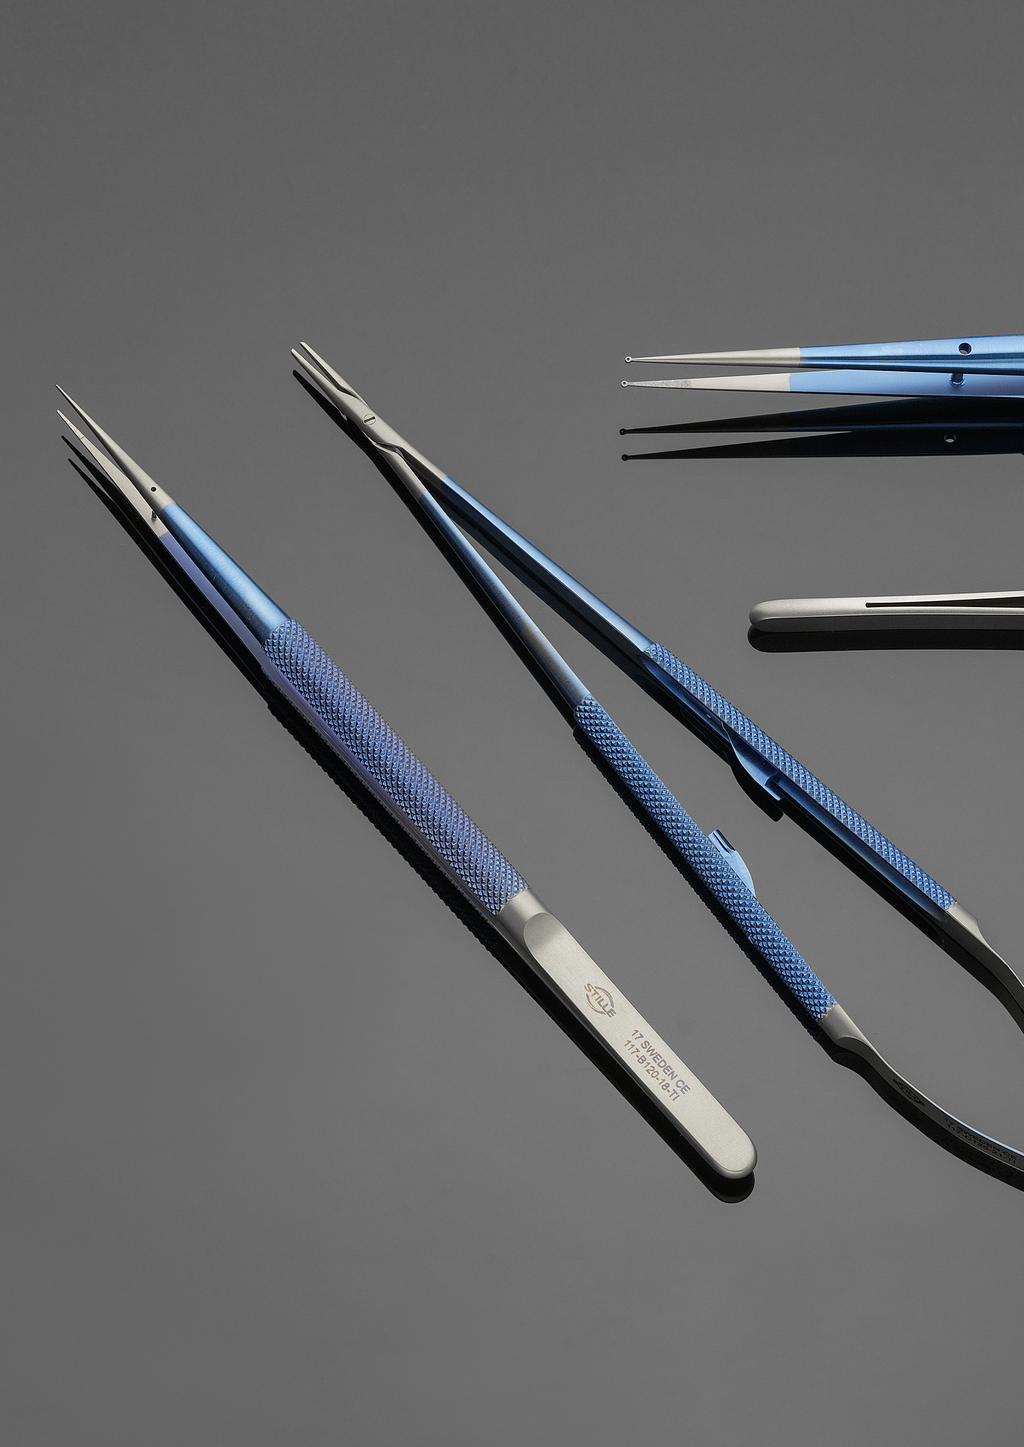 STILLE Micro Instruments NEW Titanium STILLE has now introduced a new line of high quality titanium forceps and needle holders.